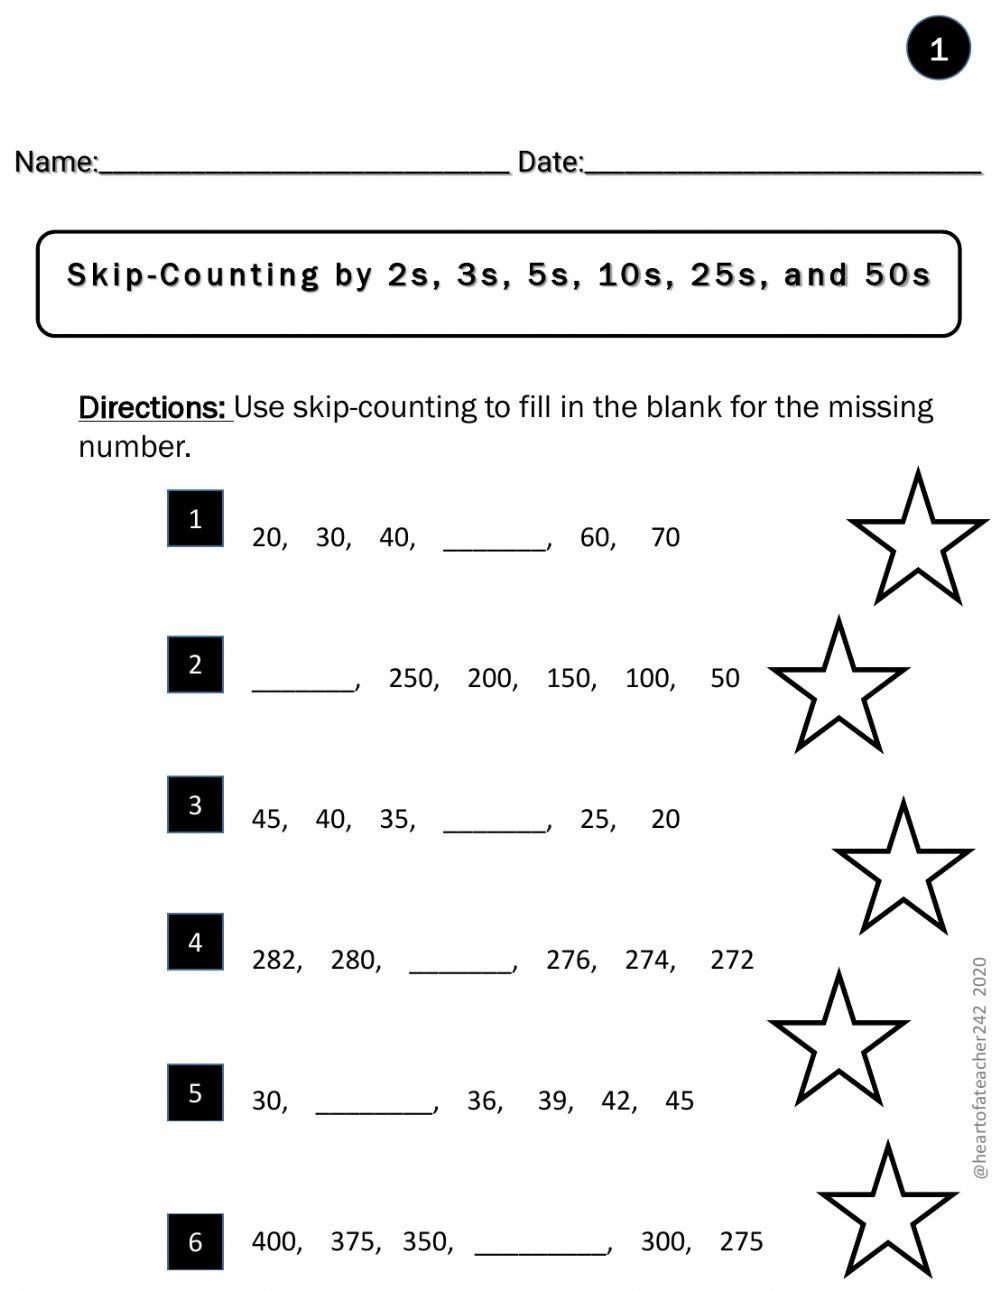 Skip Counting and Missing Numbers on Number Line